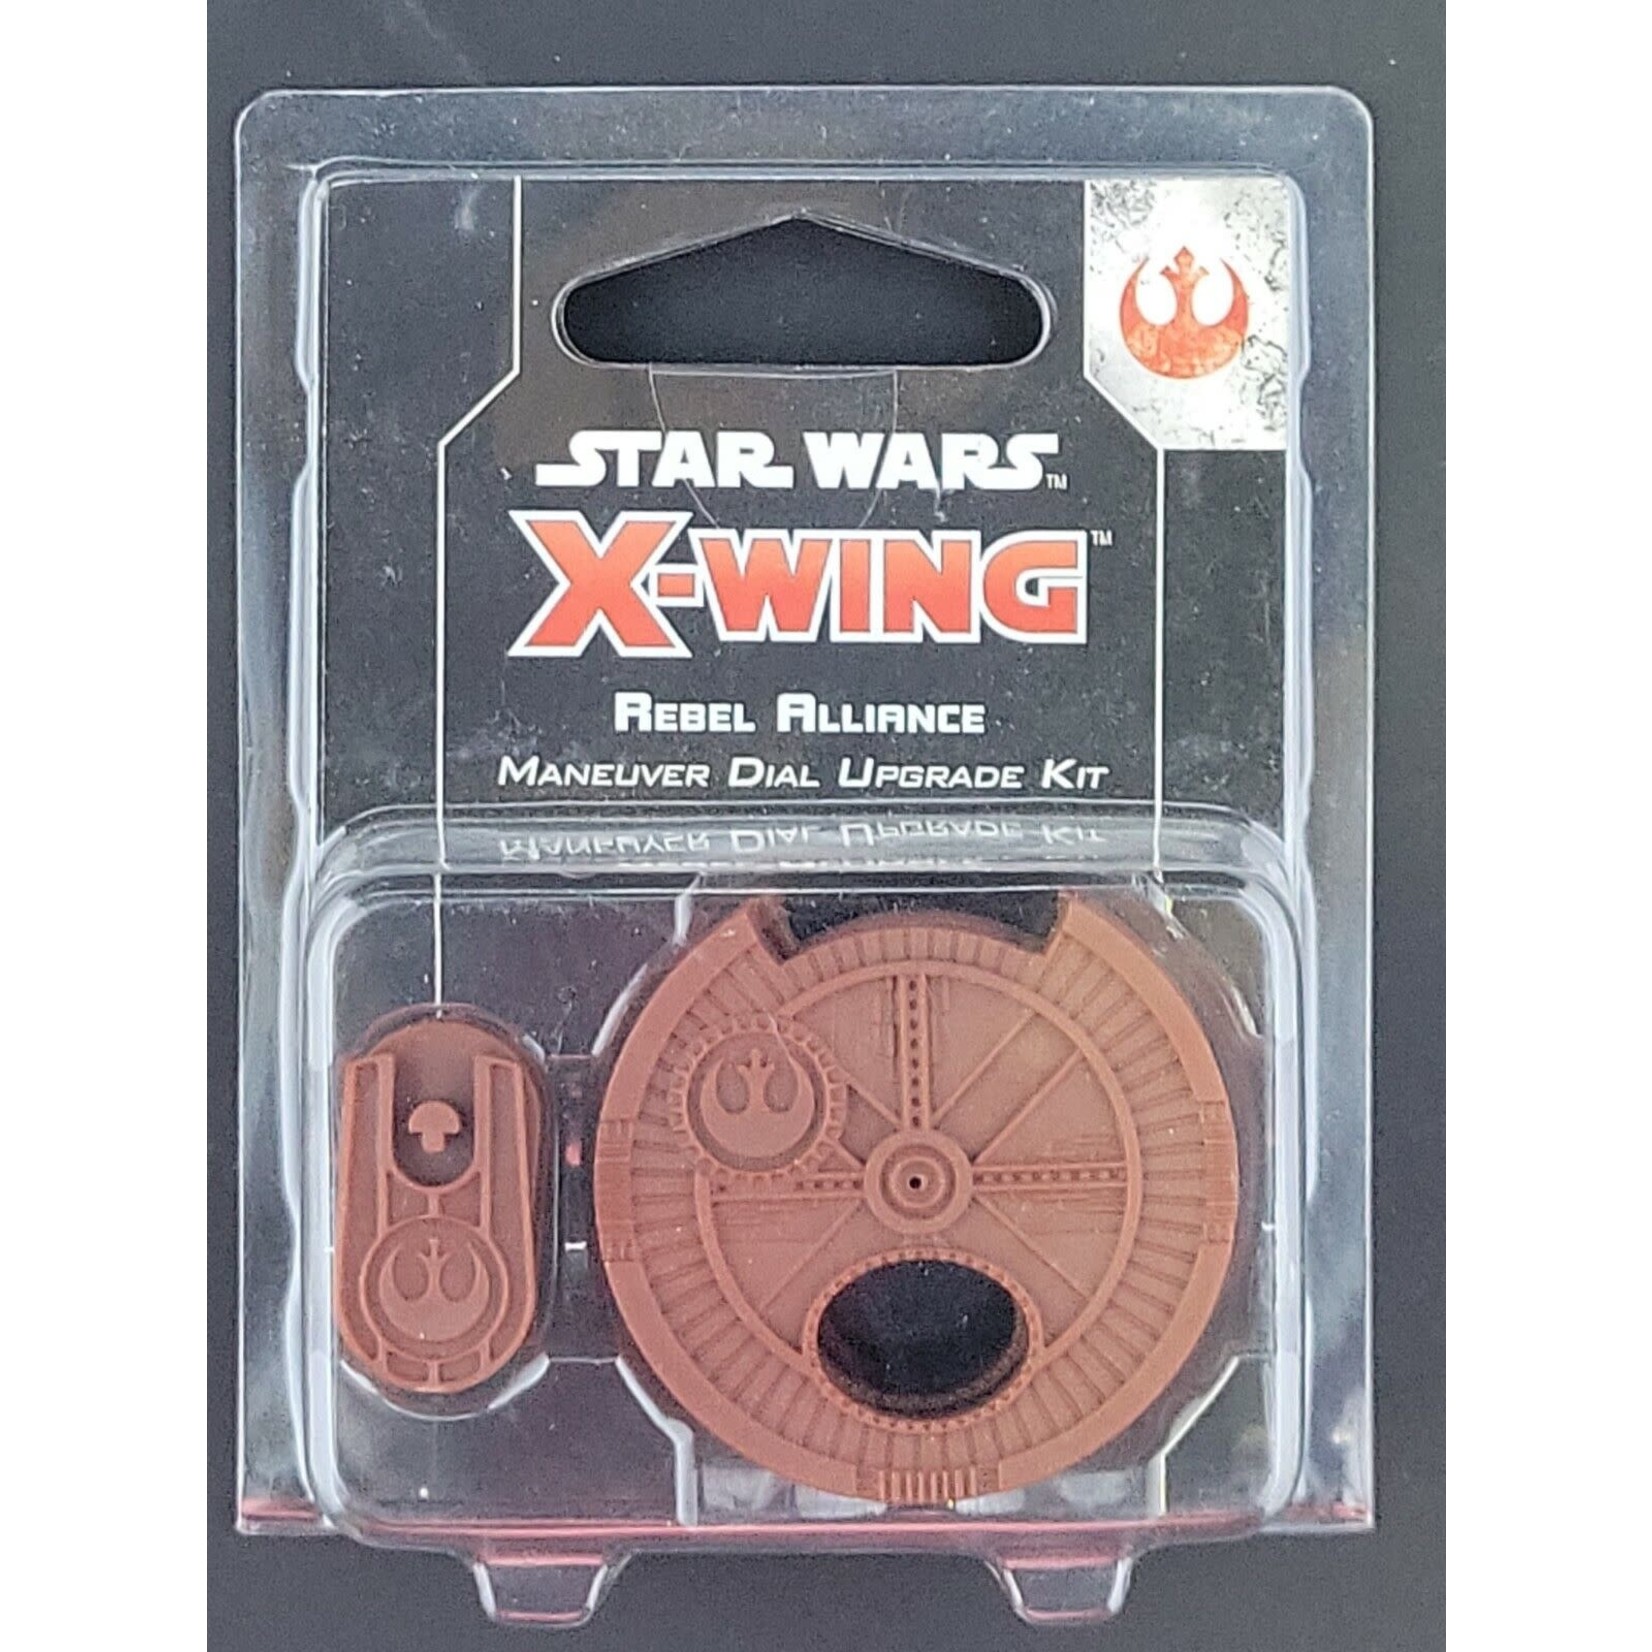 Misc FFGSWZ09 Star Wars X-Wing: Rebel Dial Upgrade FFGSWZ09